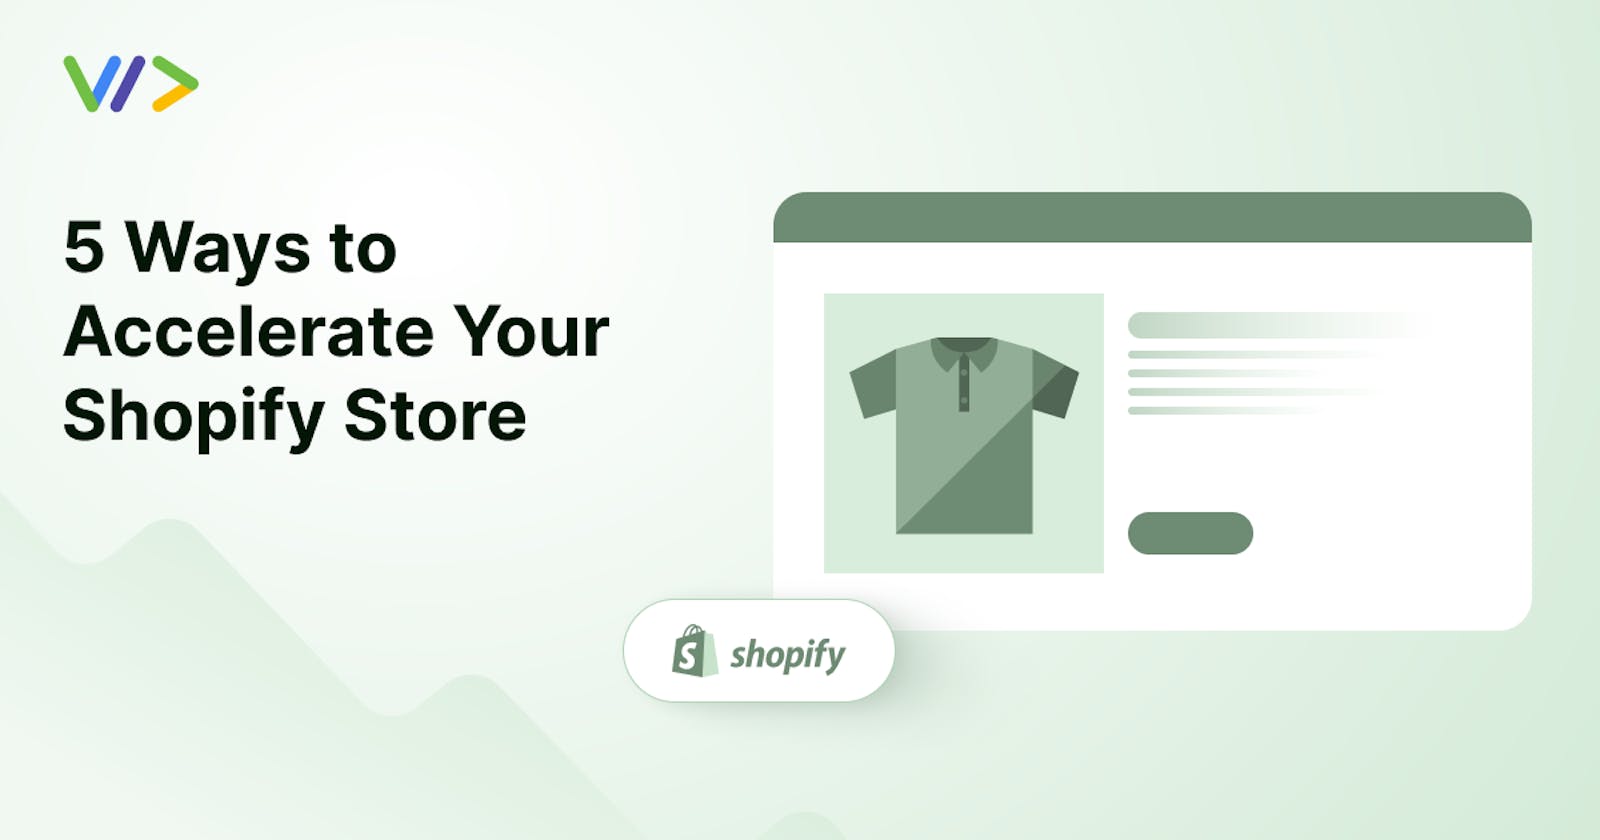 5 Simple Ways to Accelerate Your Shopify Store